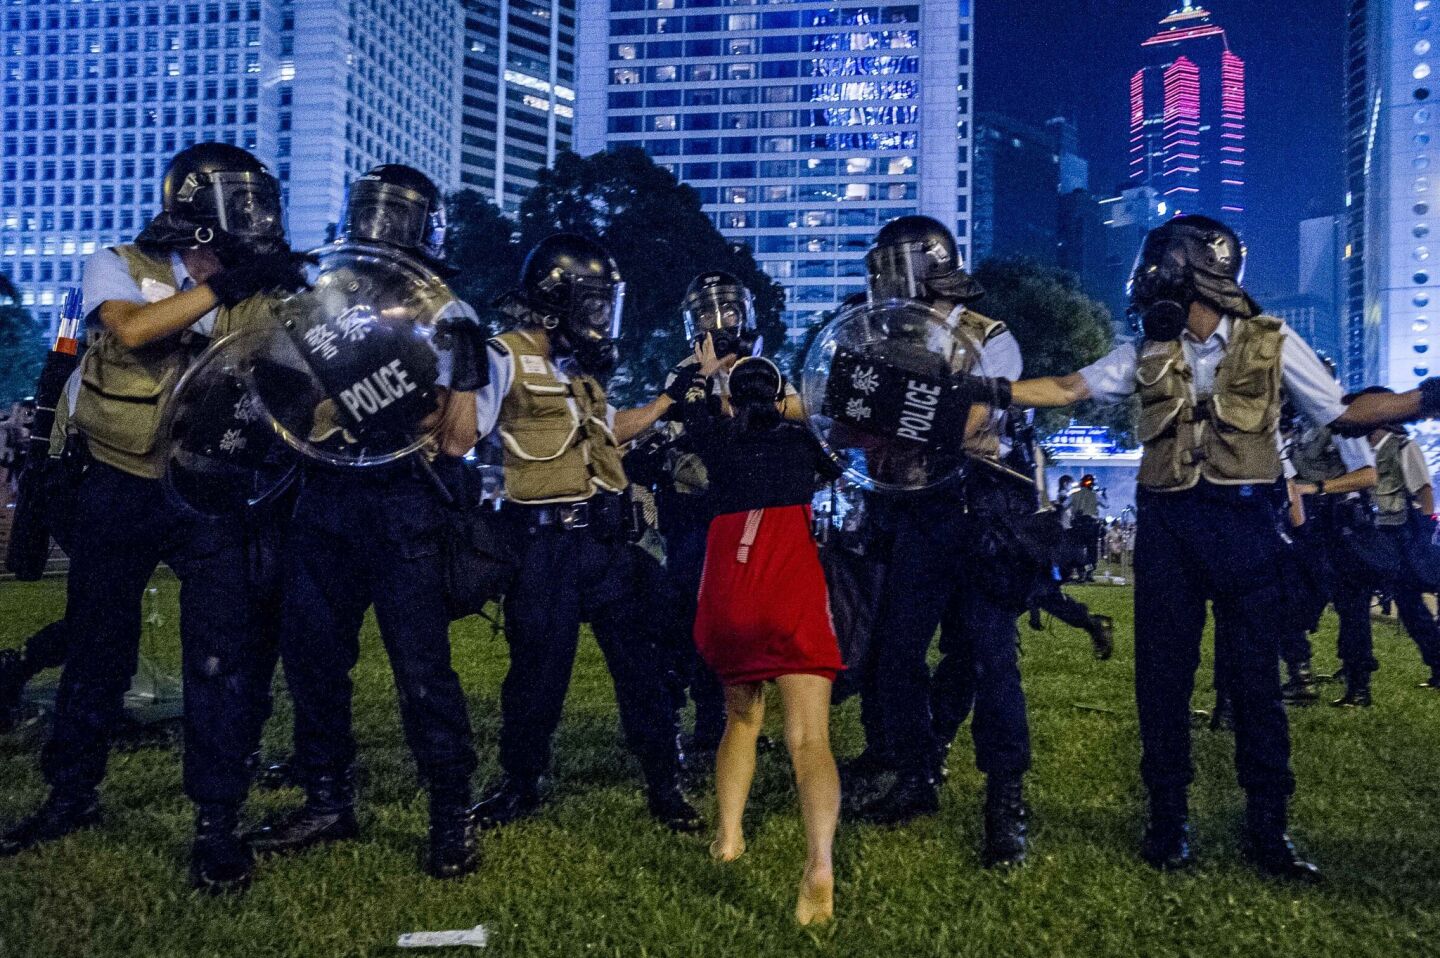 A pro-democracy protester confronts the police during a demonstration in Hong Kong.